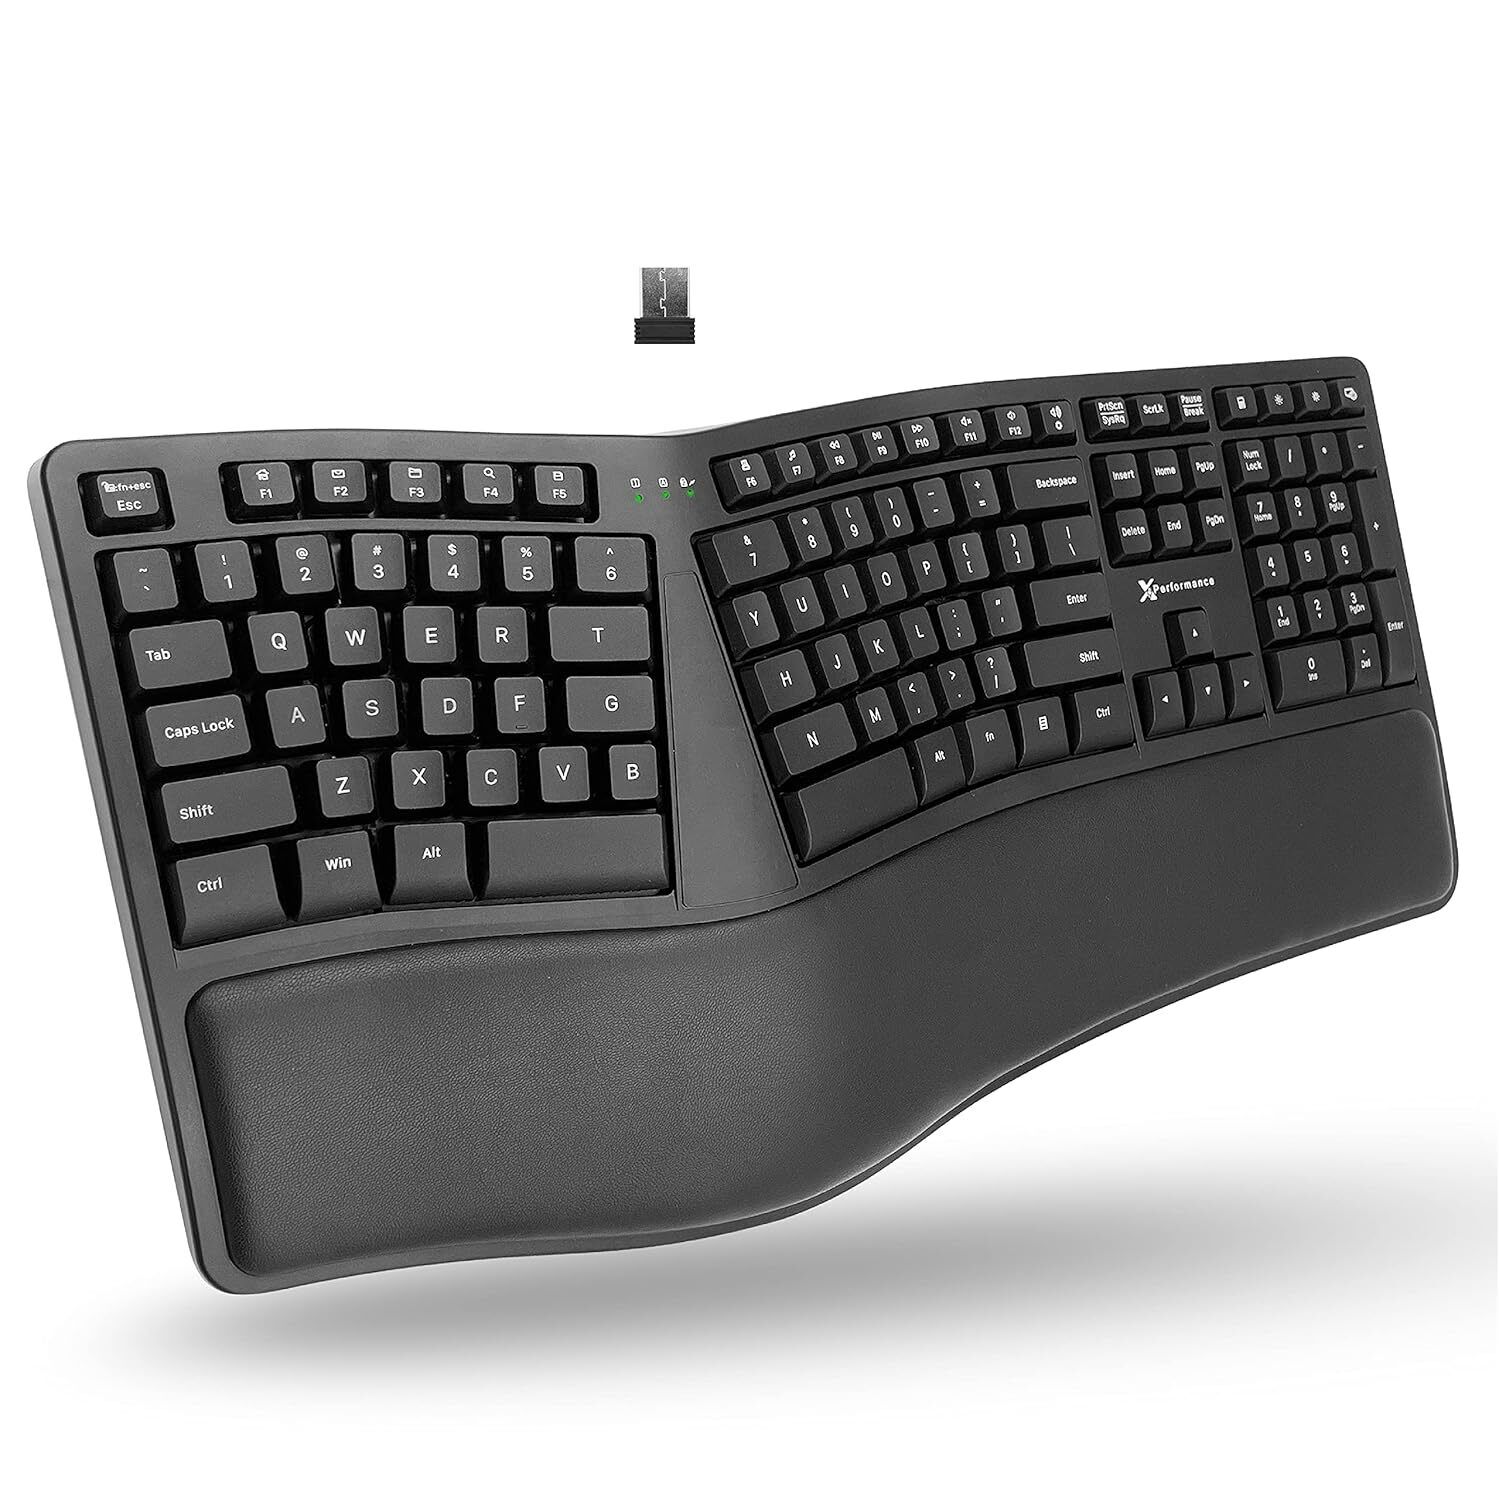 Ergonomic Keyboard Wireless - Your Comfort Matters - Full Size Rechargeable 2.